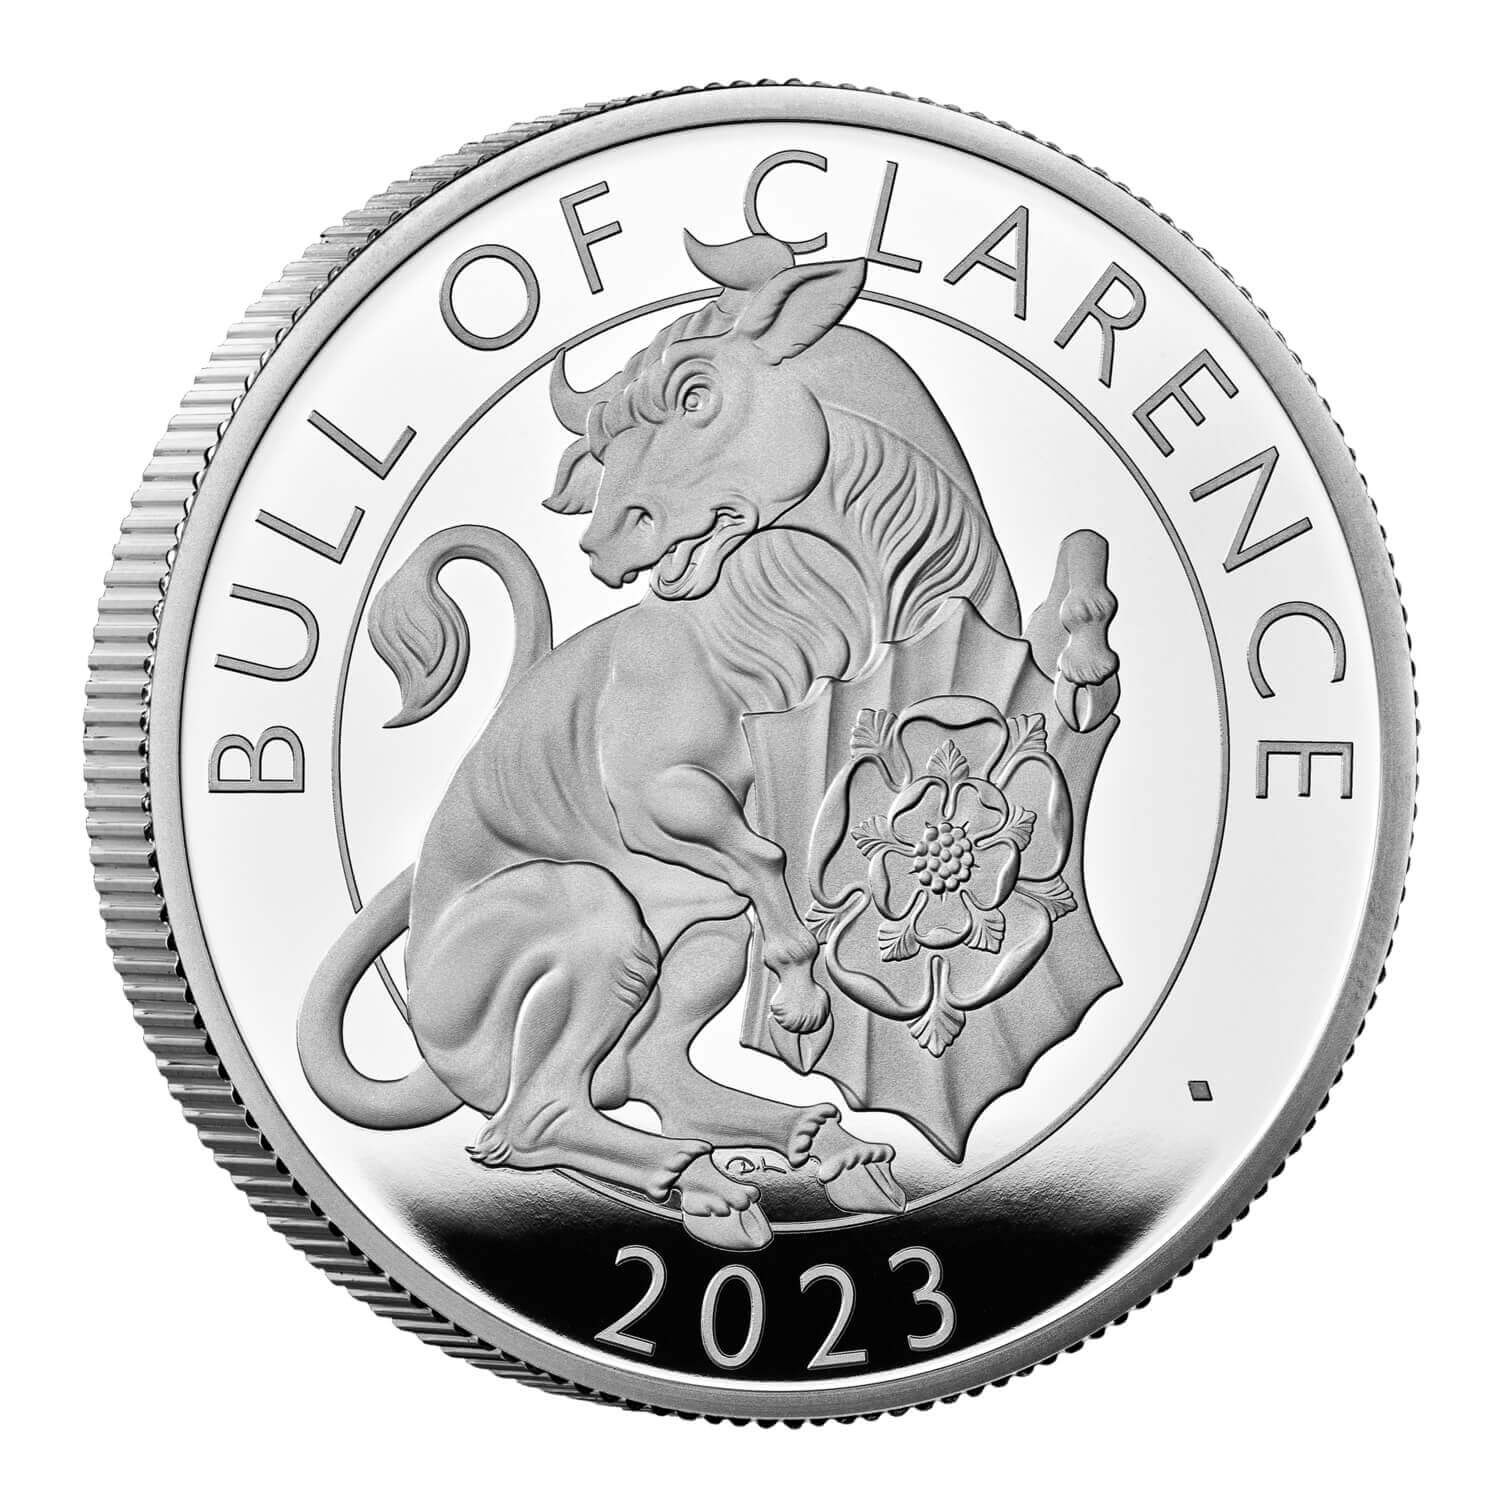 (W185.2.P.2023.UK23BCSP) 2 Pounds United Kingdom 2023 1 oz Proof silver - The Bull of Clarence Reverse (zoom)